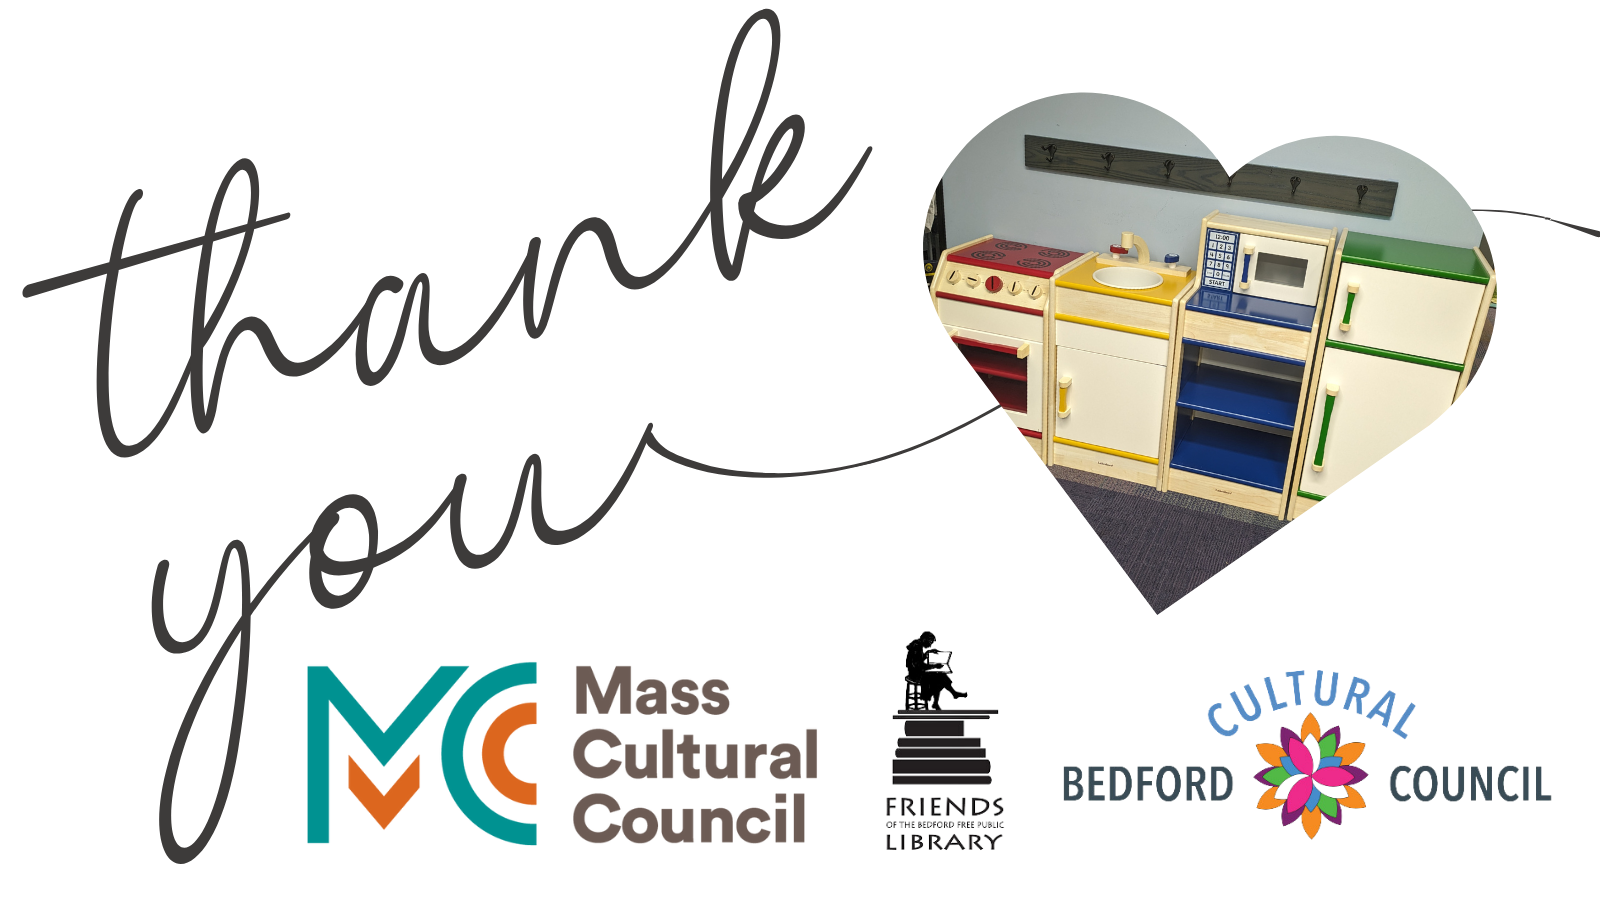 Letters say thank you, cultural council logos for massachusetts, bedford and the friends of the library at the bottom. Picture of the play kitchen in a heart frame.